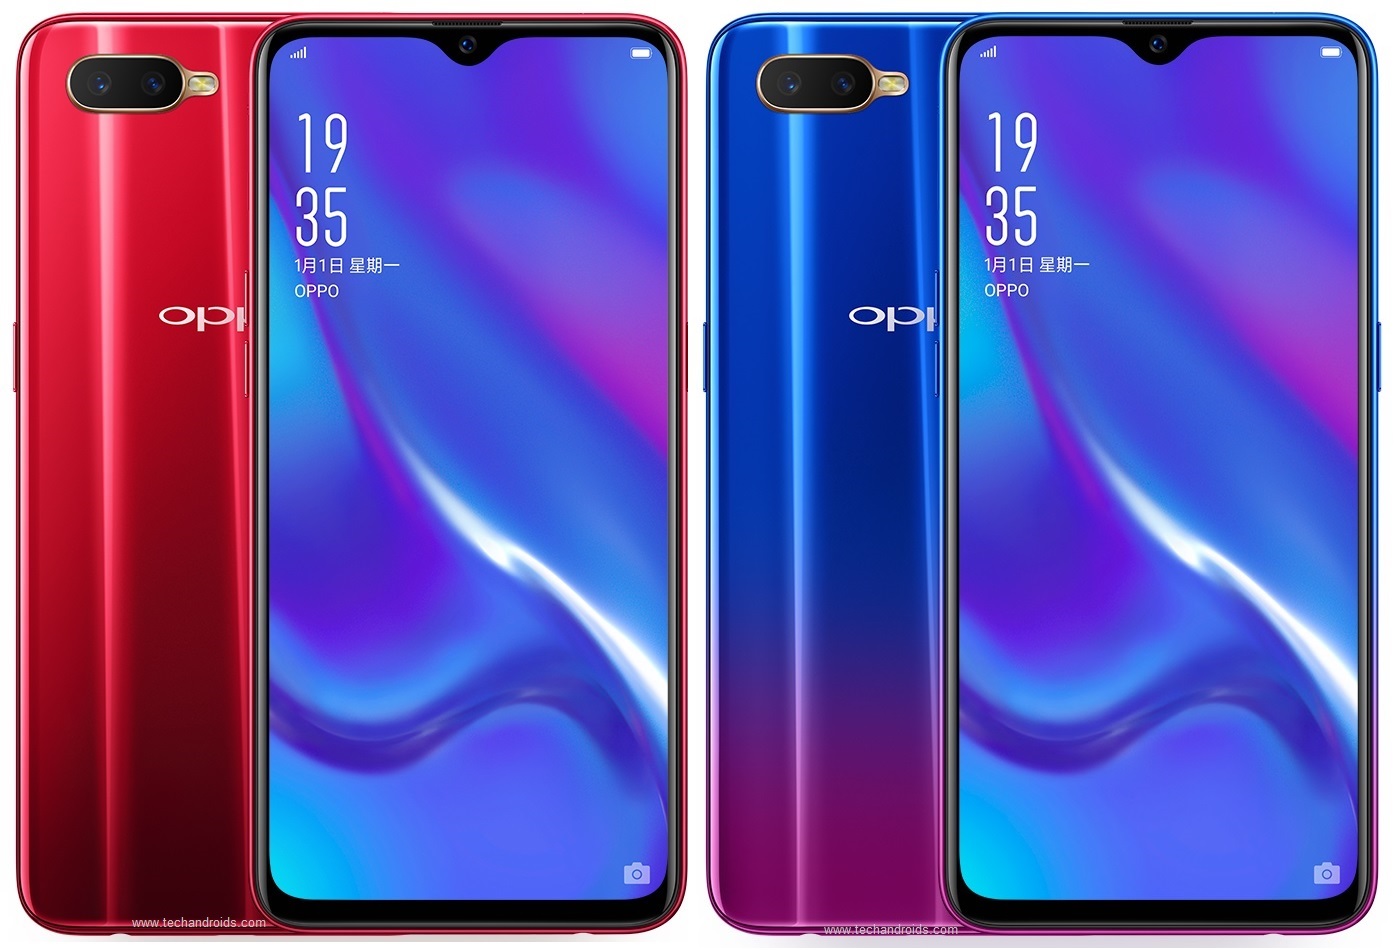 Oppo K1 goes official - Specs, Price — TechANDROIDS